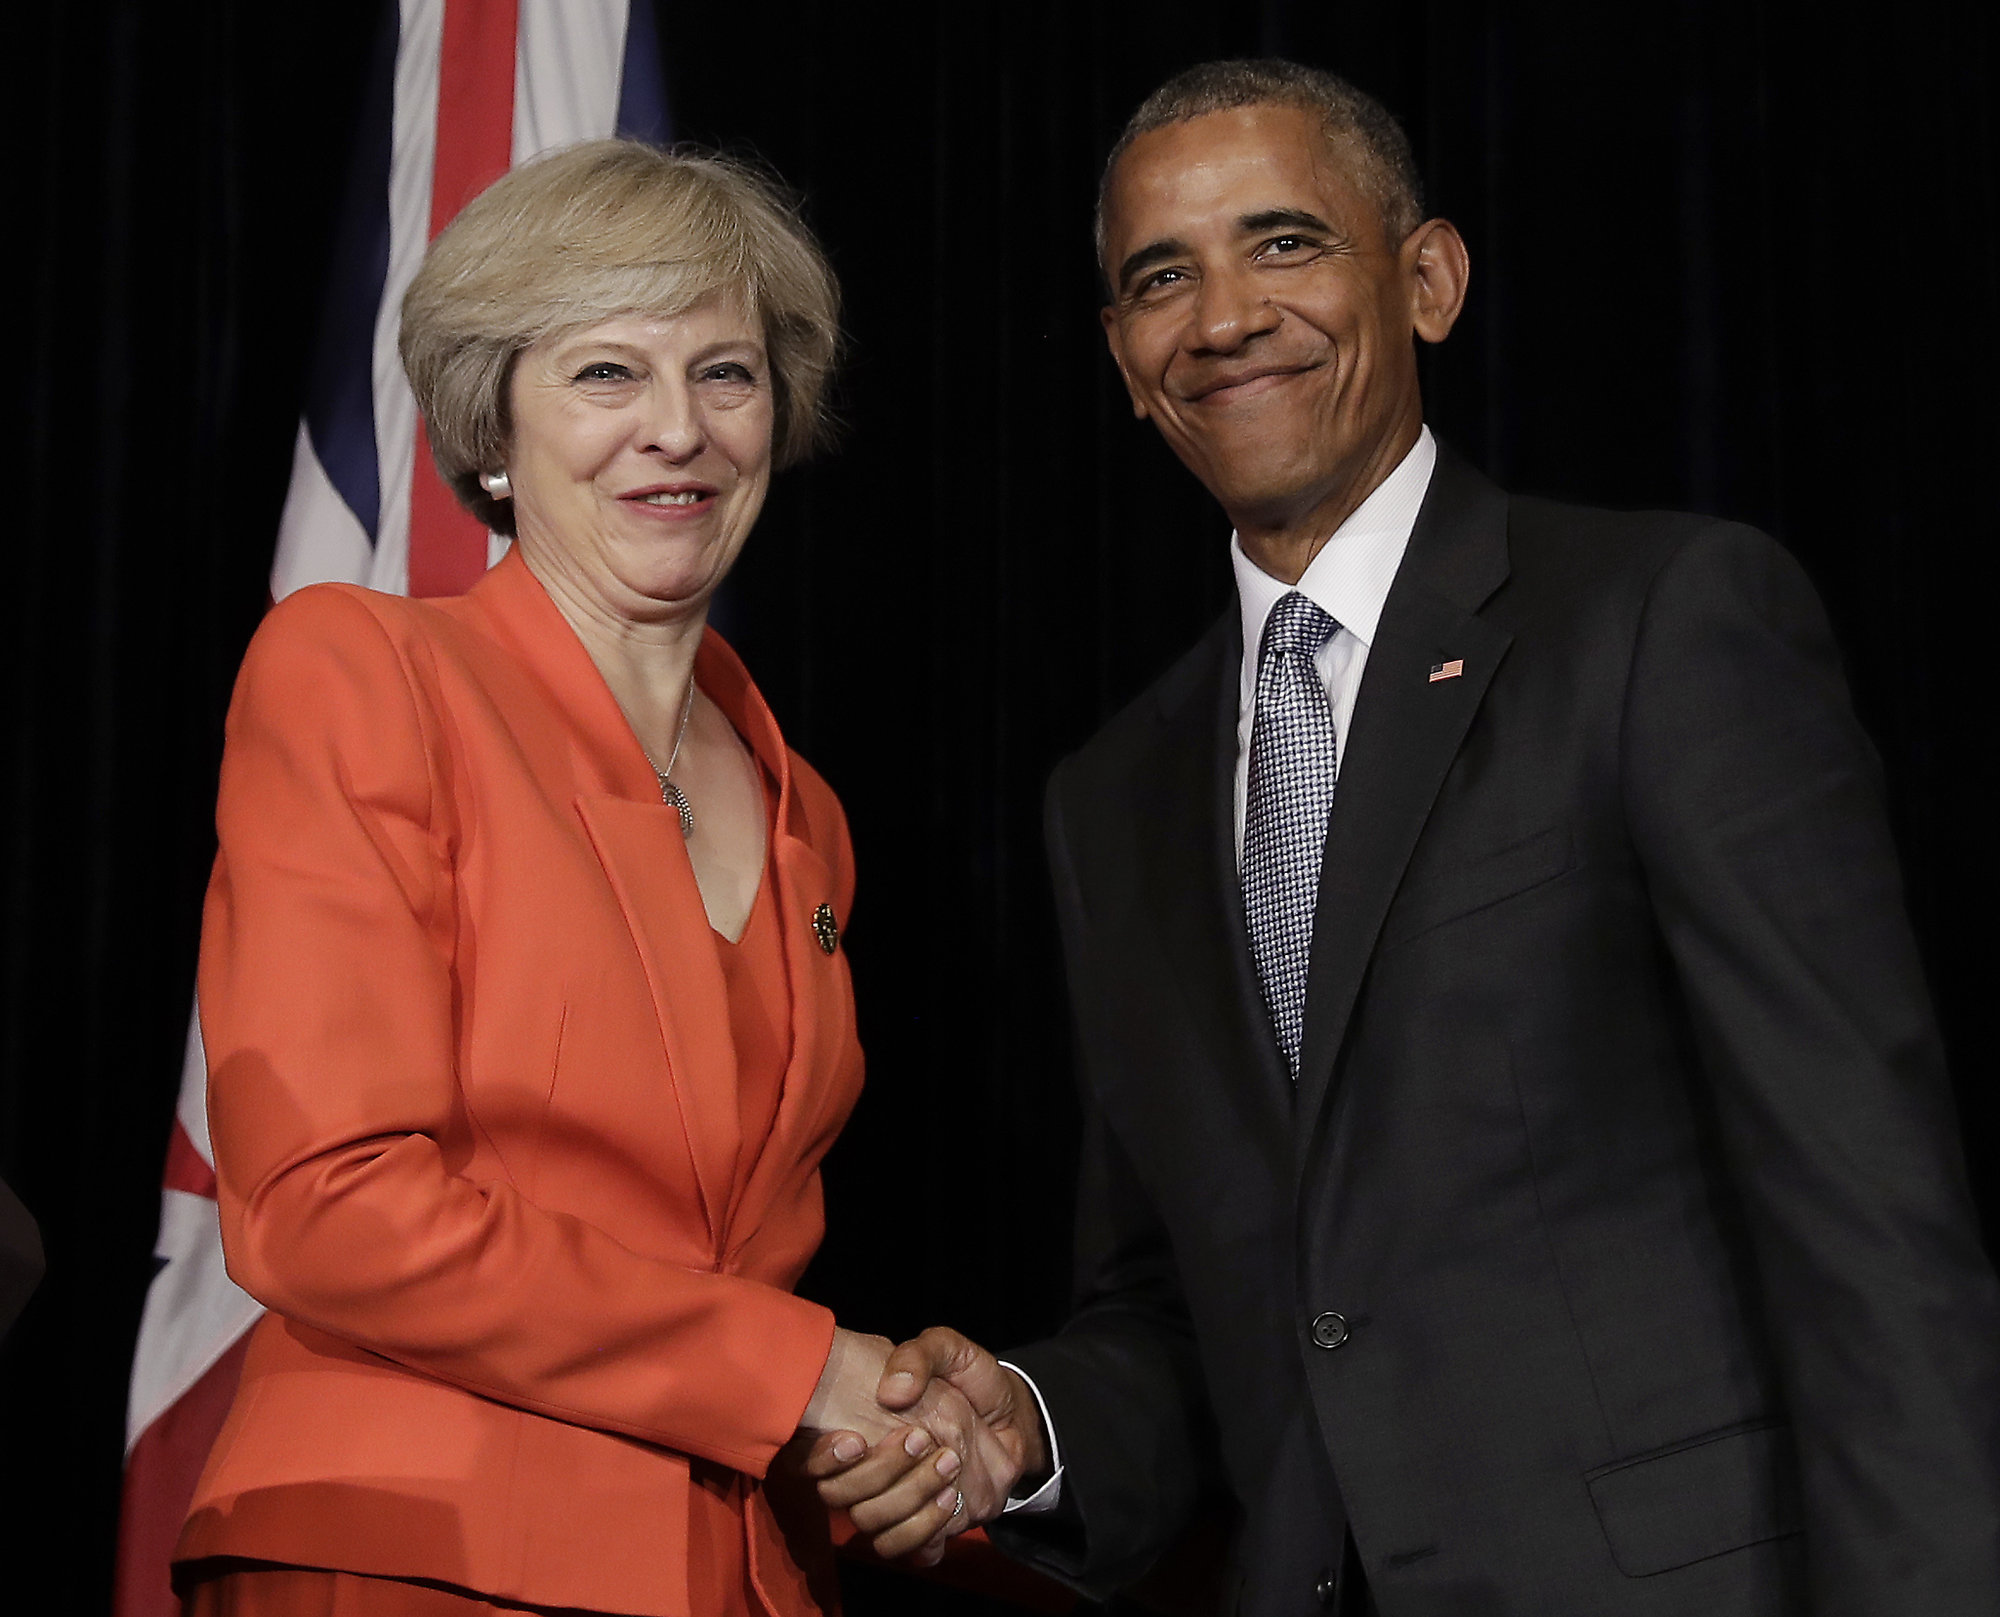 British PM May says discussed Brexit with Obama